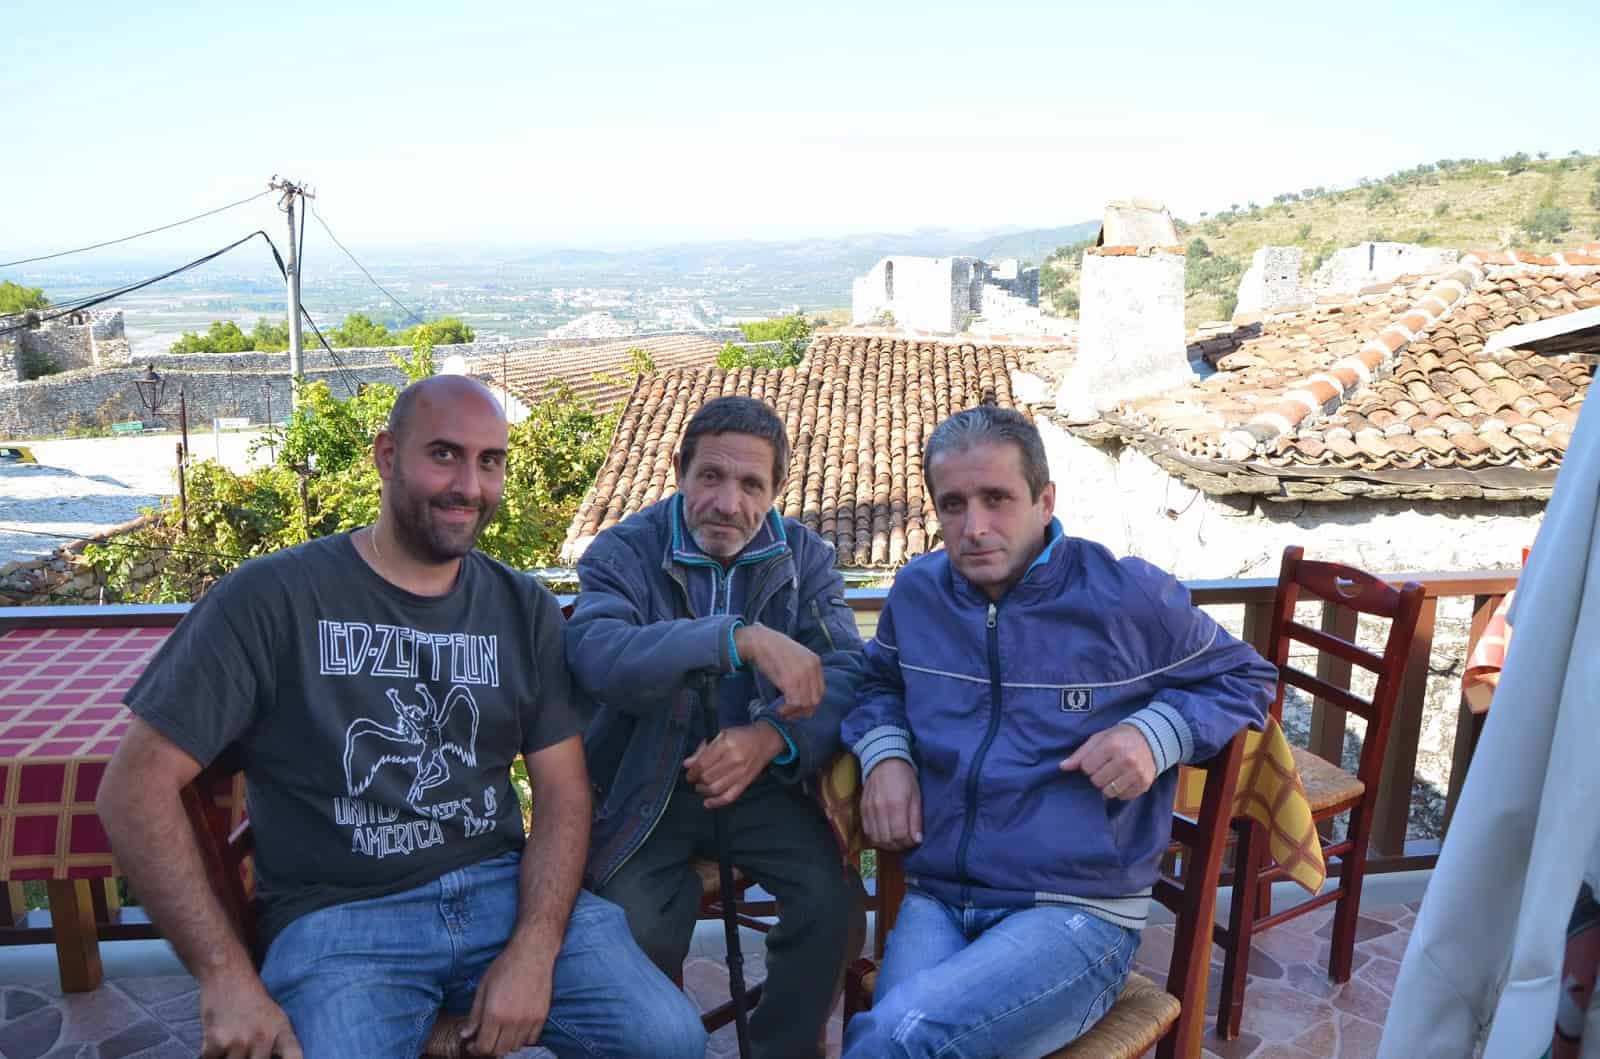 Me with my new friends from Berat, Albania